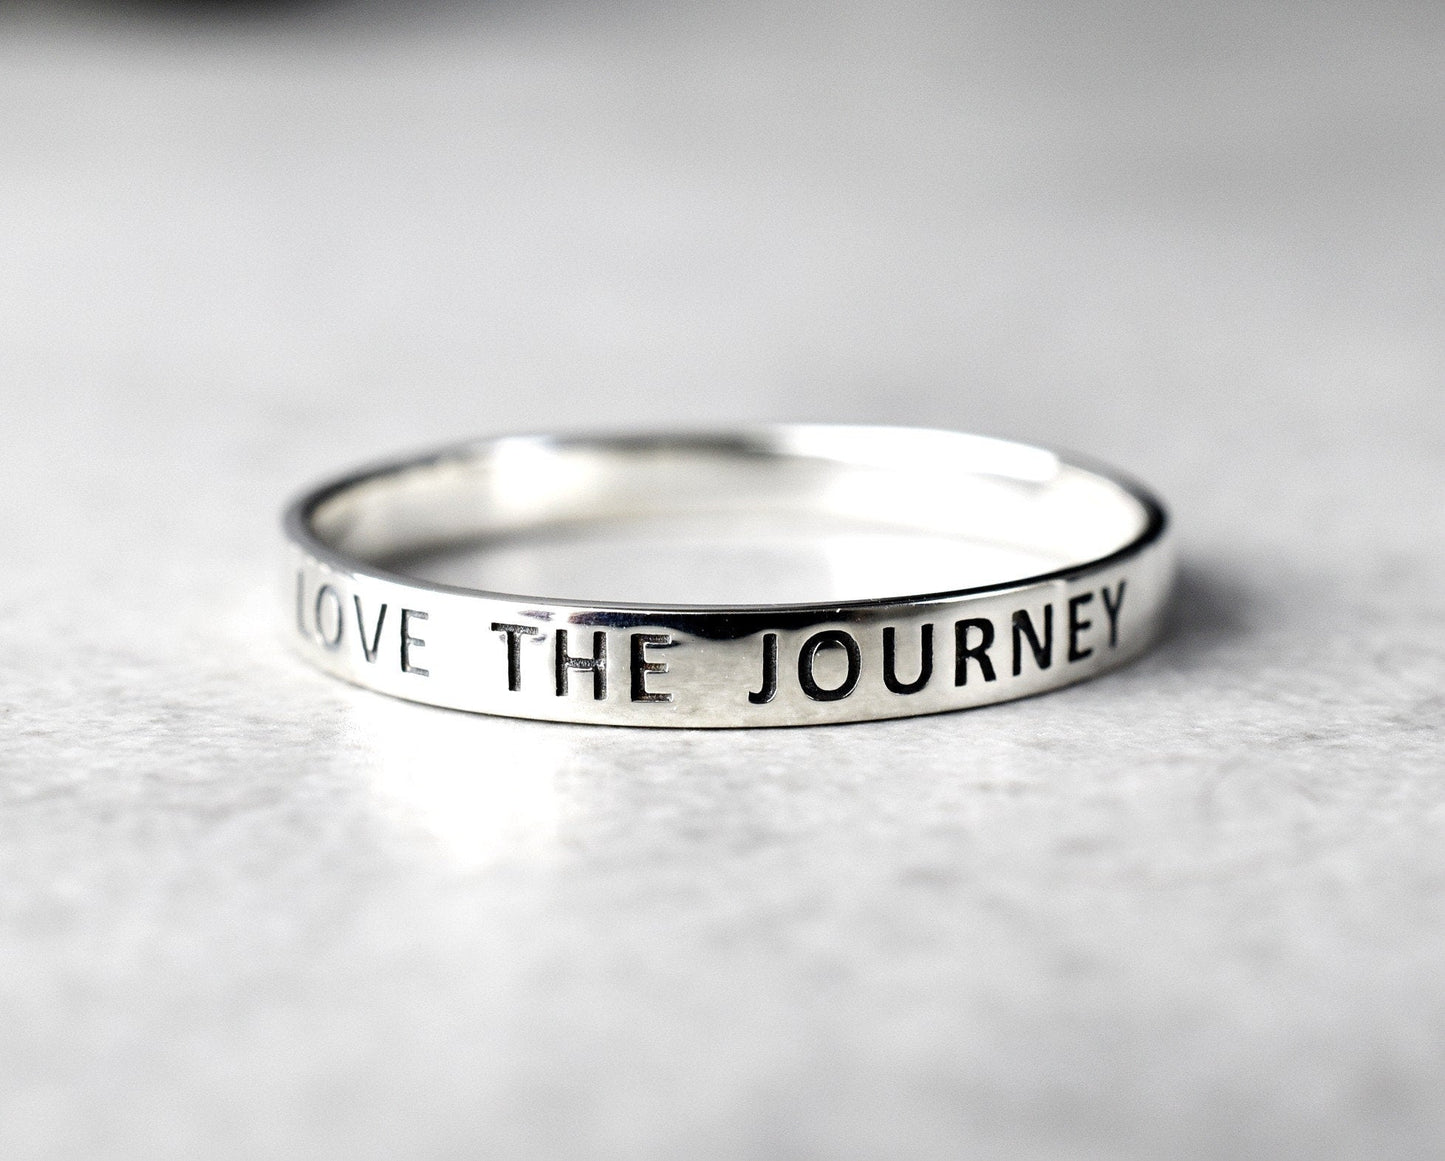 Love The Journey Ring - 925 Sterling Silver Engraving Stamp Finger Ring - RG925-55